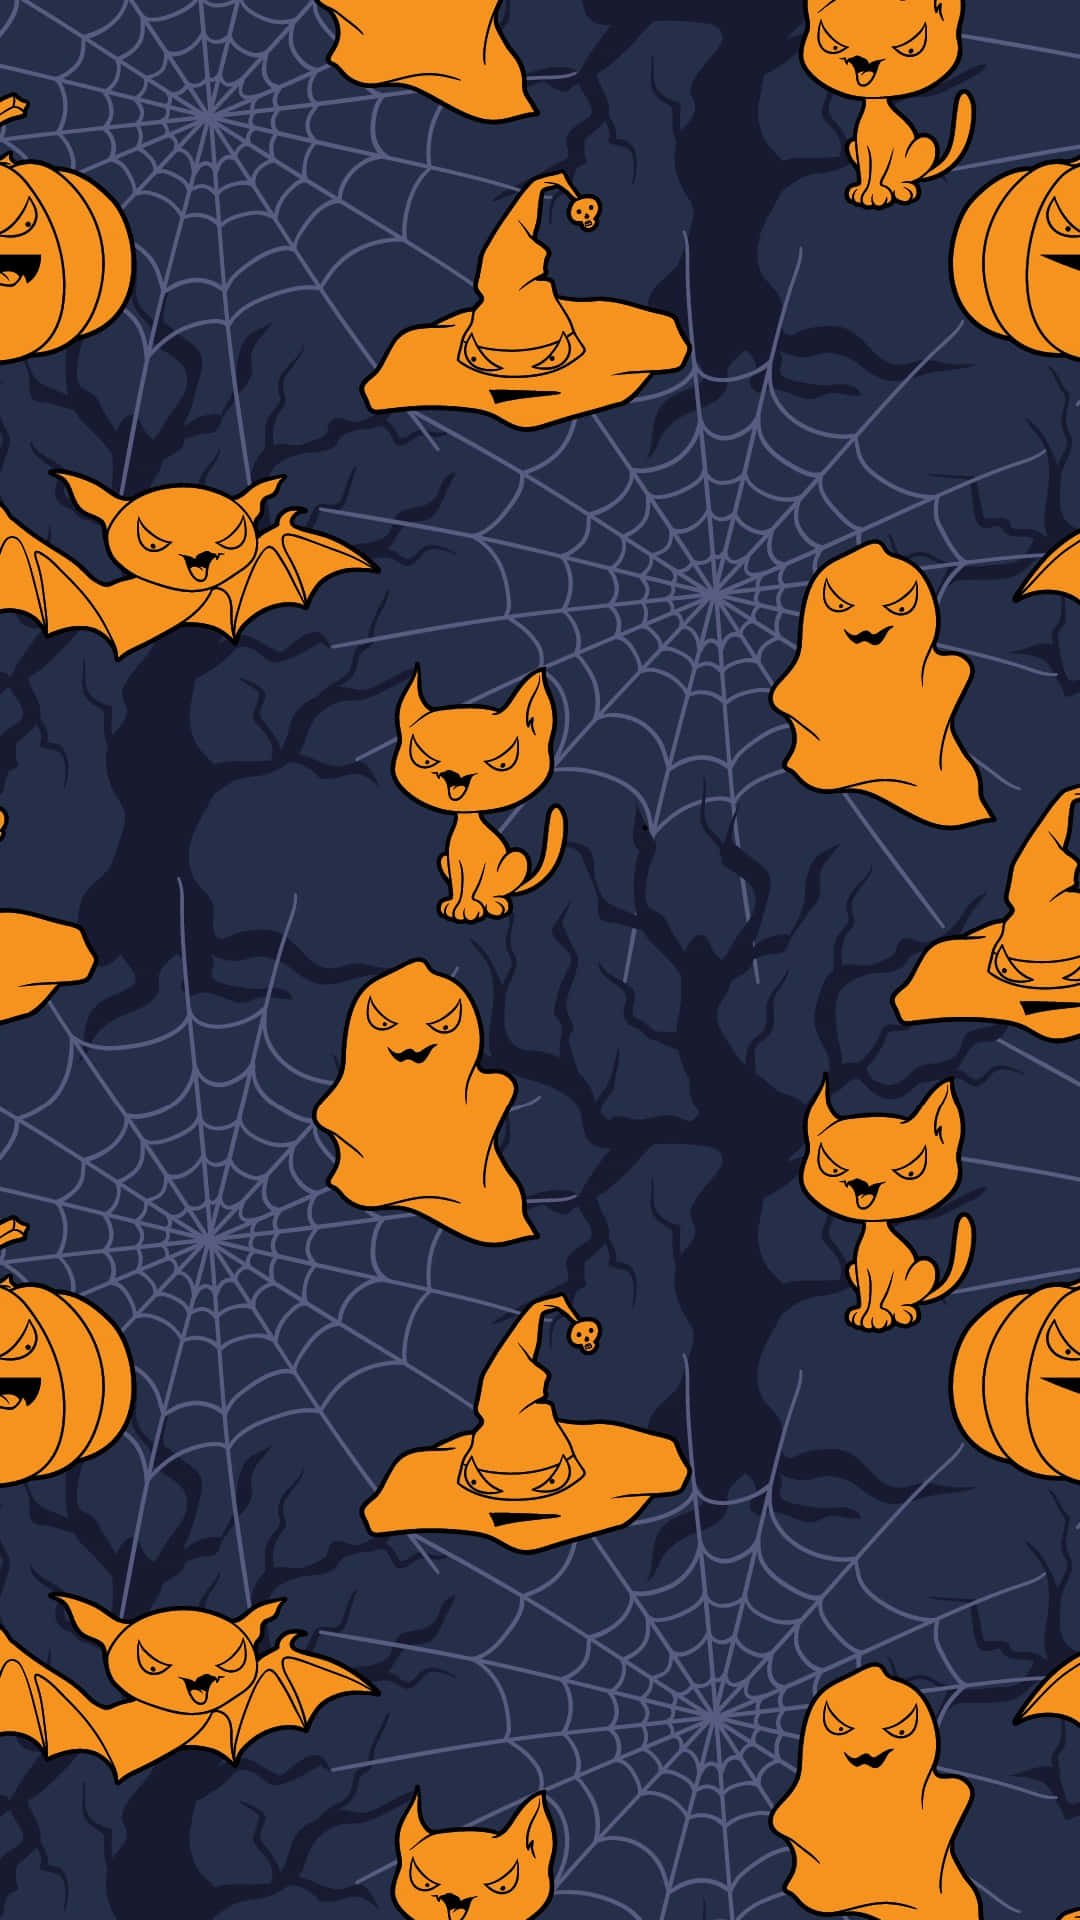 Brighten up your Halloween season with this vibrant background!